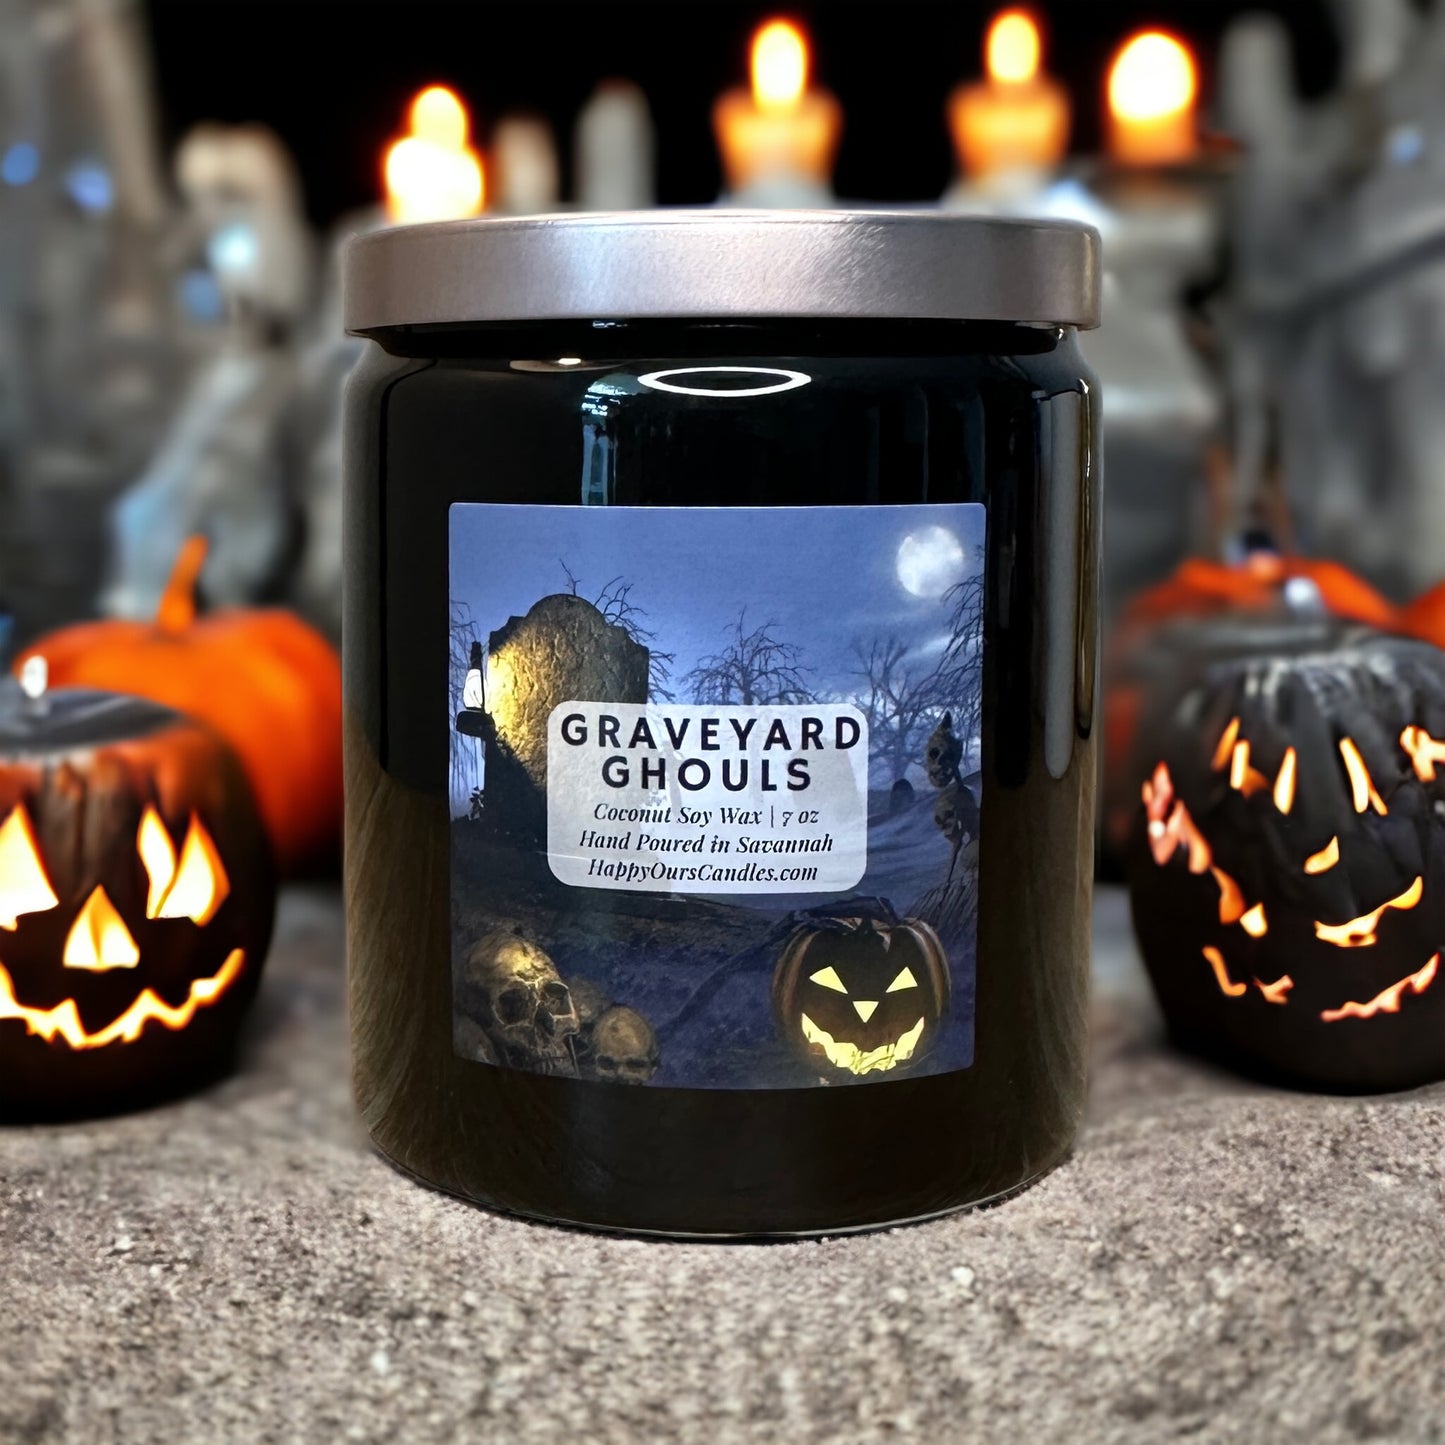 Graveyard Ghouls Scented Candle 7 oz